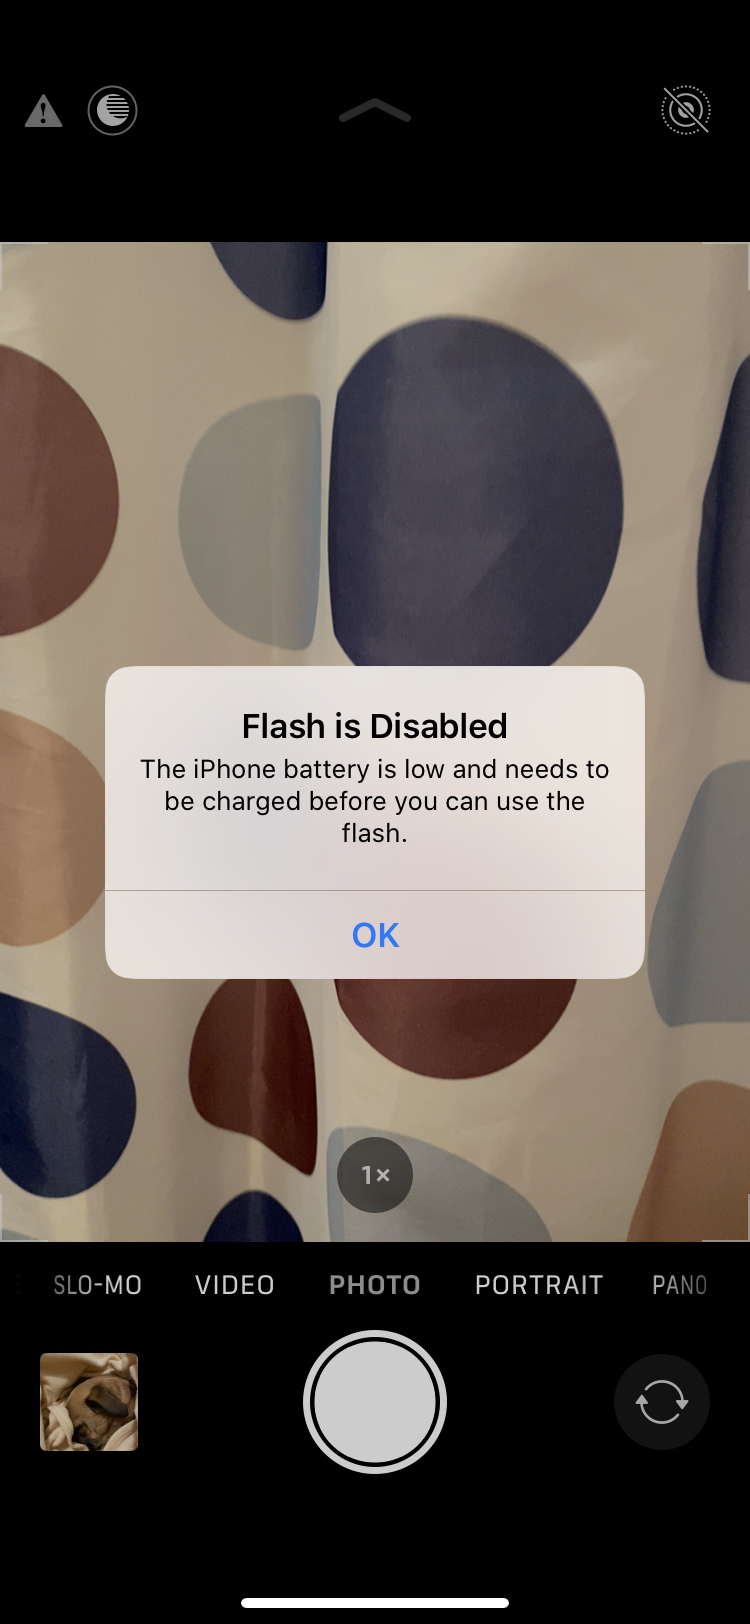 Iphone Battery Low And Flash Disabled Apple Community